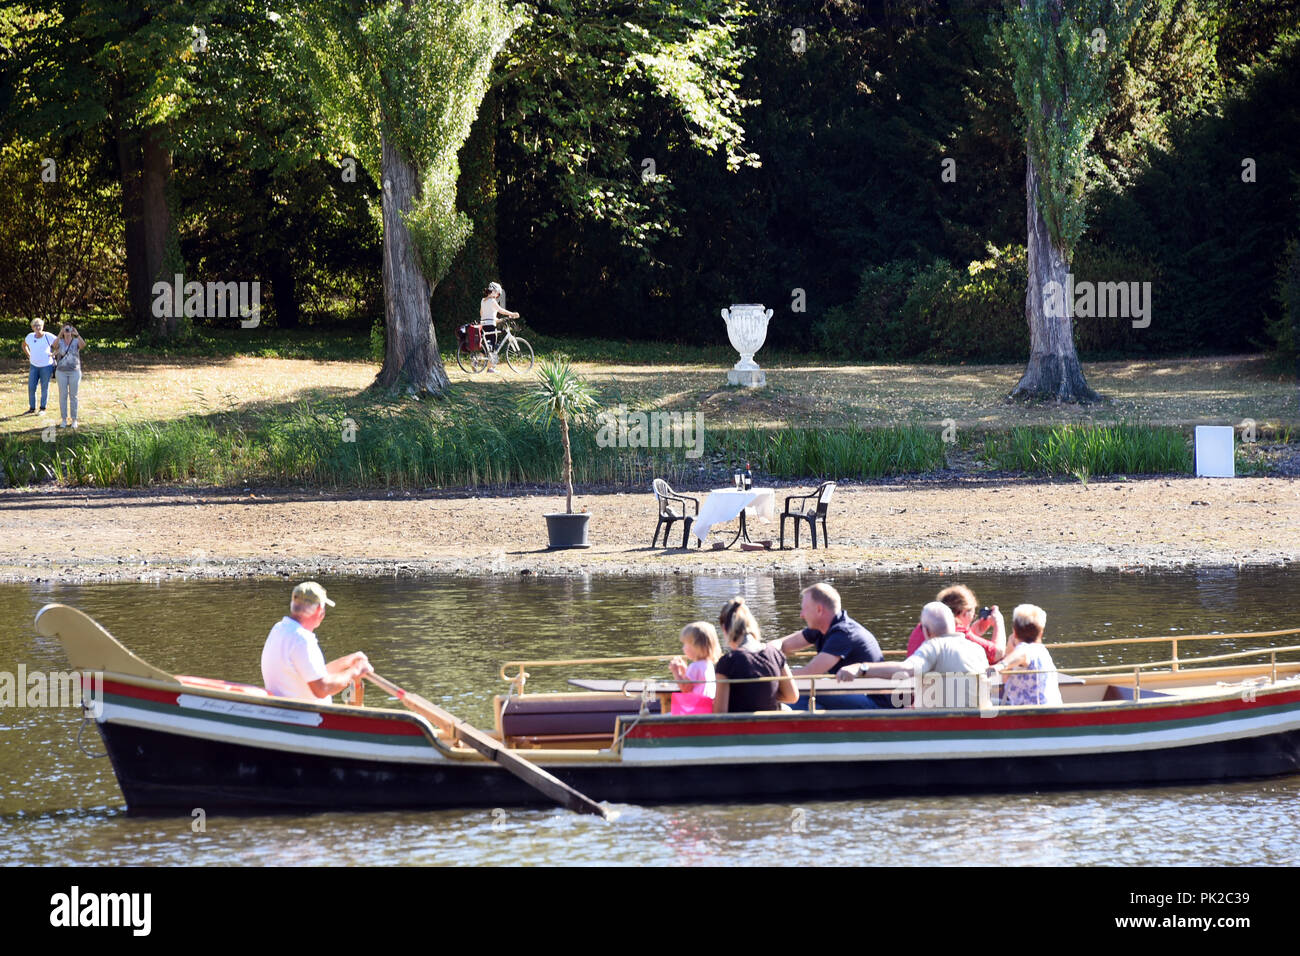 09.09.2018, Saxony-Anhalt, Wörlitz: A gondola runs along the sandbank, otherwise covered with about one meter of water, in the Wörlitz Garden Kingdom, on which the gondoliers have placed a table set in white and two chairs. The gondoliers, who are no longer able to navigate the canals with the visitors, but can use part of the lake, want to embellish the dried out peripheral areas with their installation. The drought, which has lasted for months, has drained almost the entire extensive canal system in the Wörlitz Garden Kingdom, a UNESCO World Heritage Site. The landscape park between Dessau-R Stock Photo